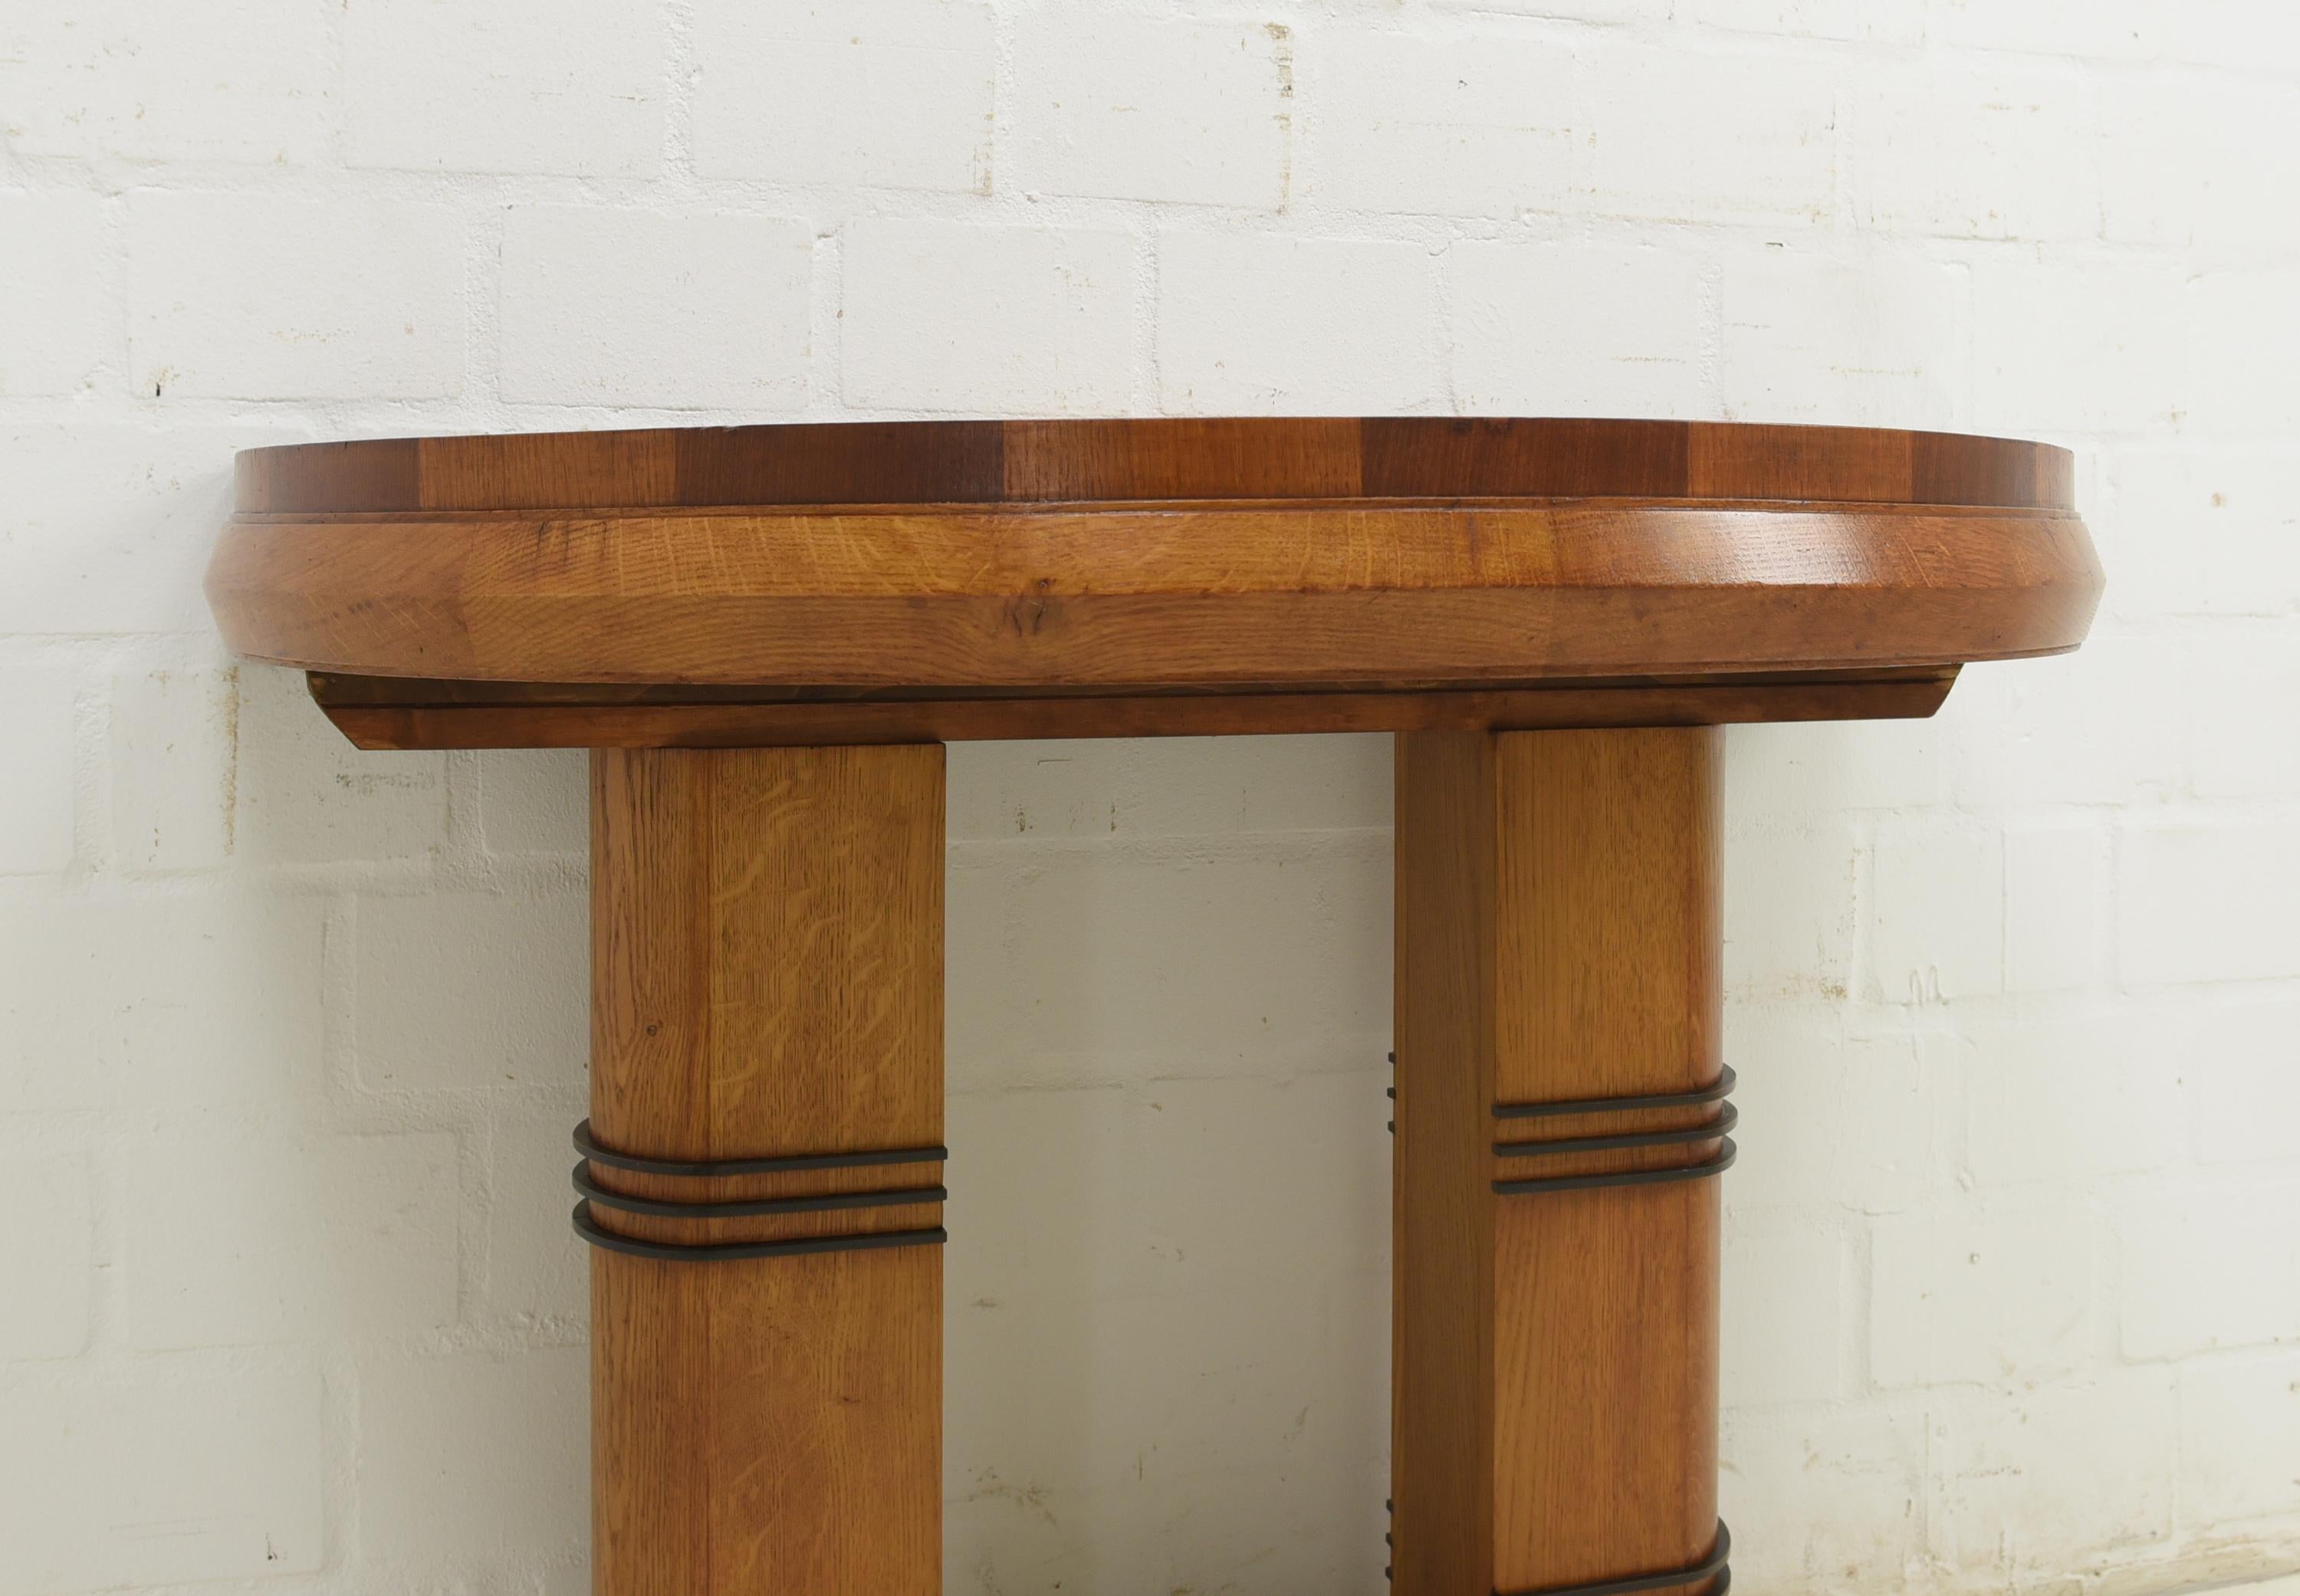 20th Century Art Deco Console Table / Wall Table in Oak Mahogany 2/2, 1930 For Sale